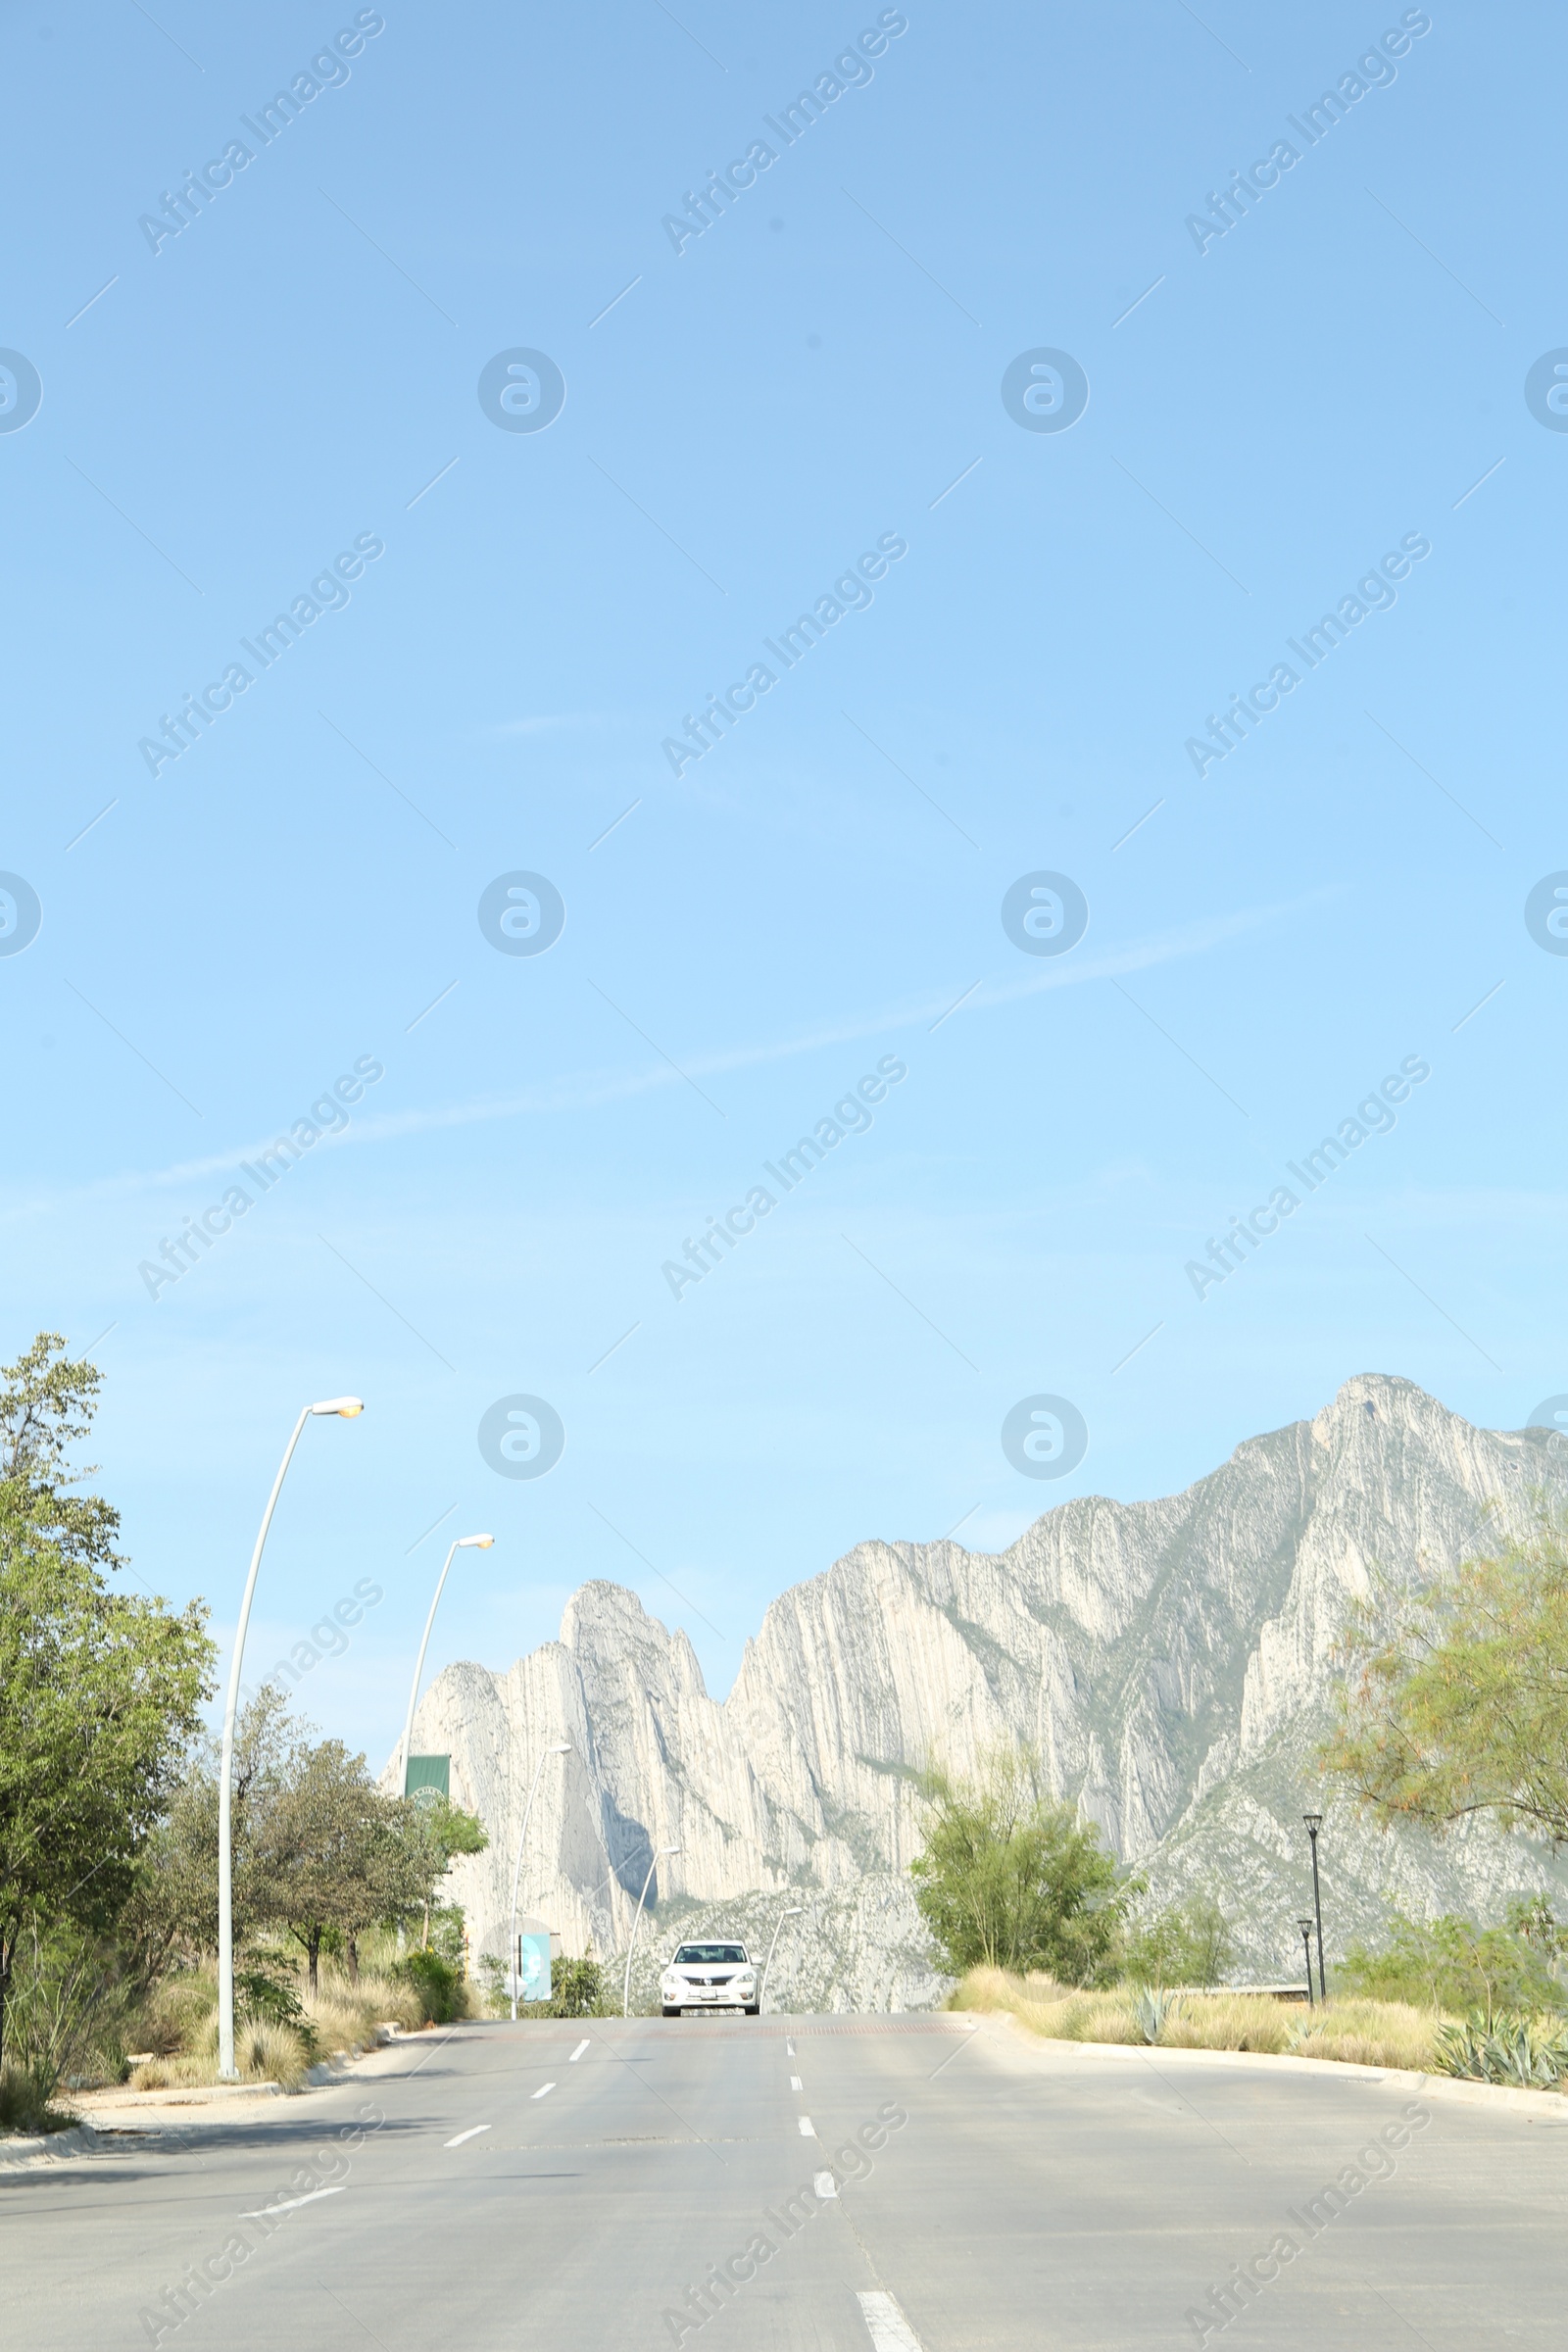 Photo of Beautiful view of asphalt road near trees in mountains